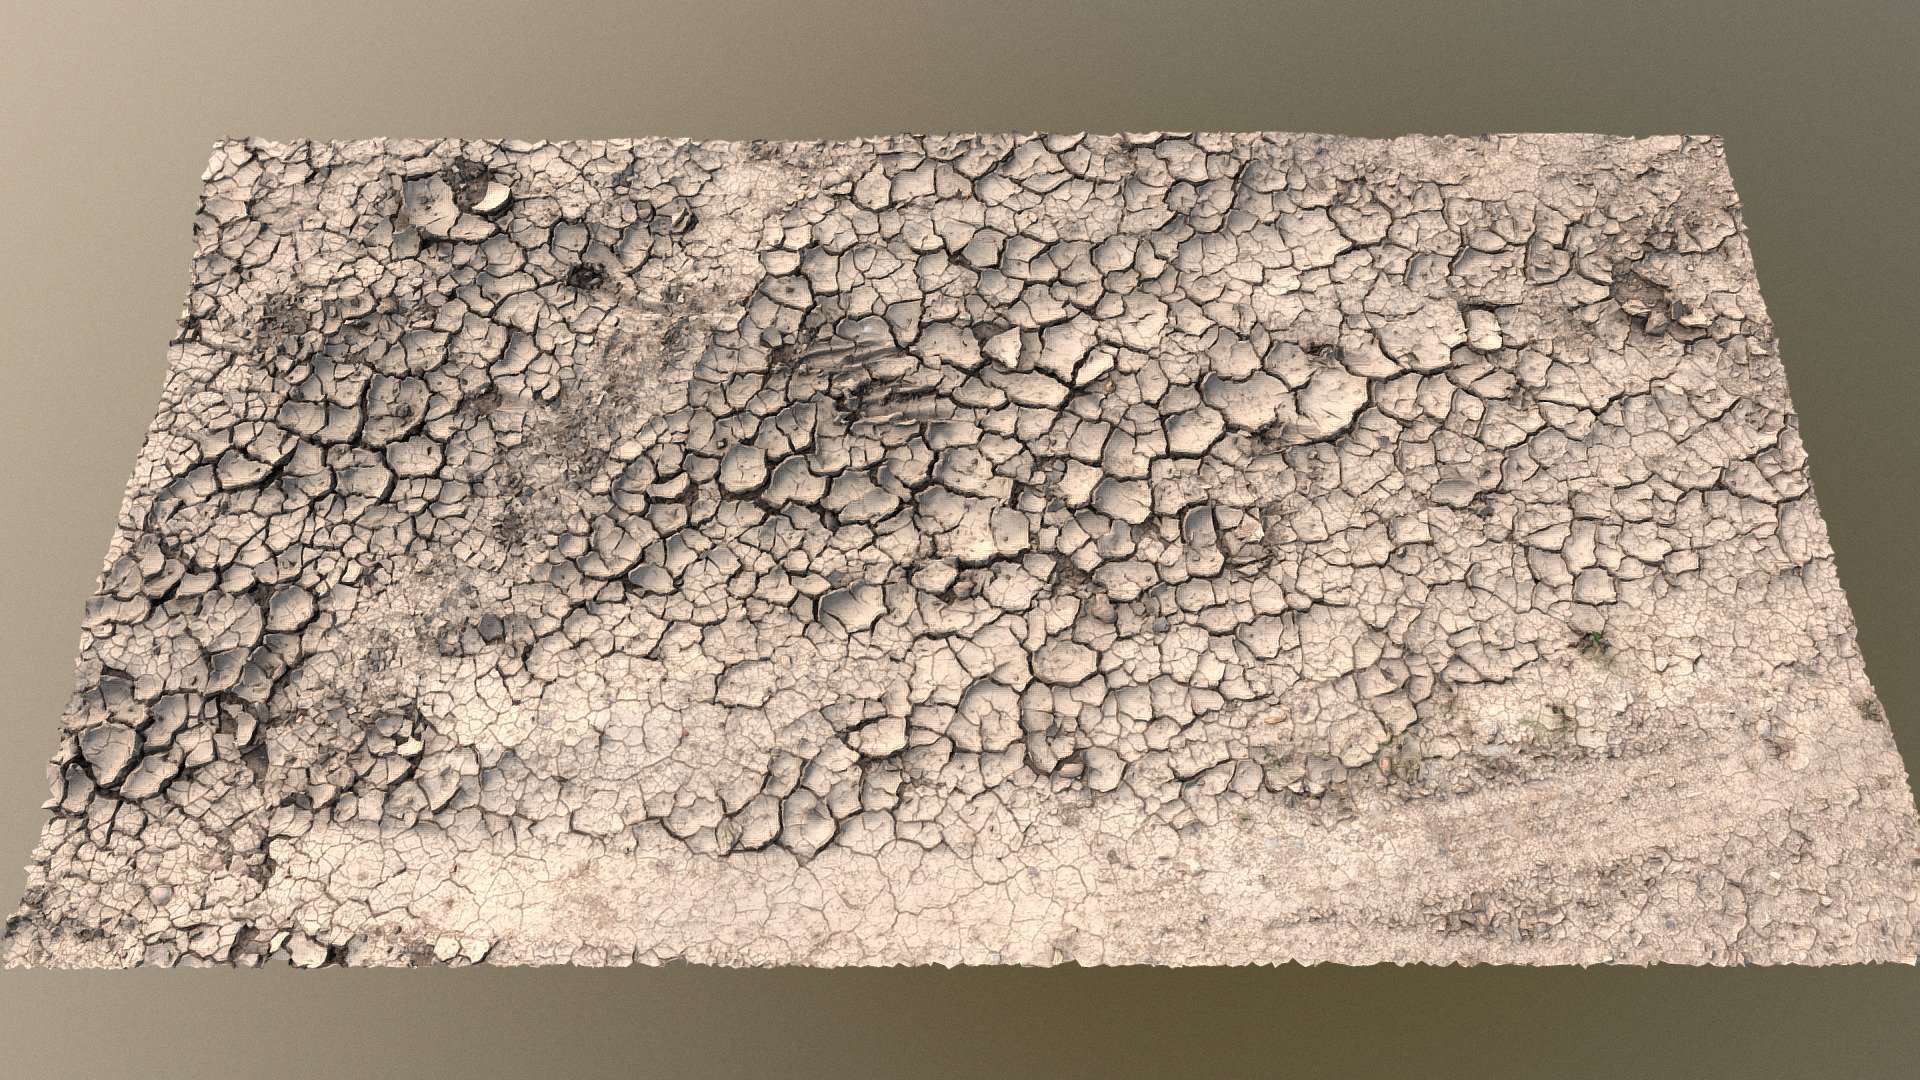 Drought dry soil desert land barren eroded ground dust bowl with cracks and car wheel track

extended model with larger area and 2x16K, shot on a cloudy day - fully de-lighted
photogrammetry scan (24MP, 100+) - Drought dry soil desert cracks ground erosion II - Buy Royalty Free 3D model by matousekfoto 3d model